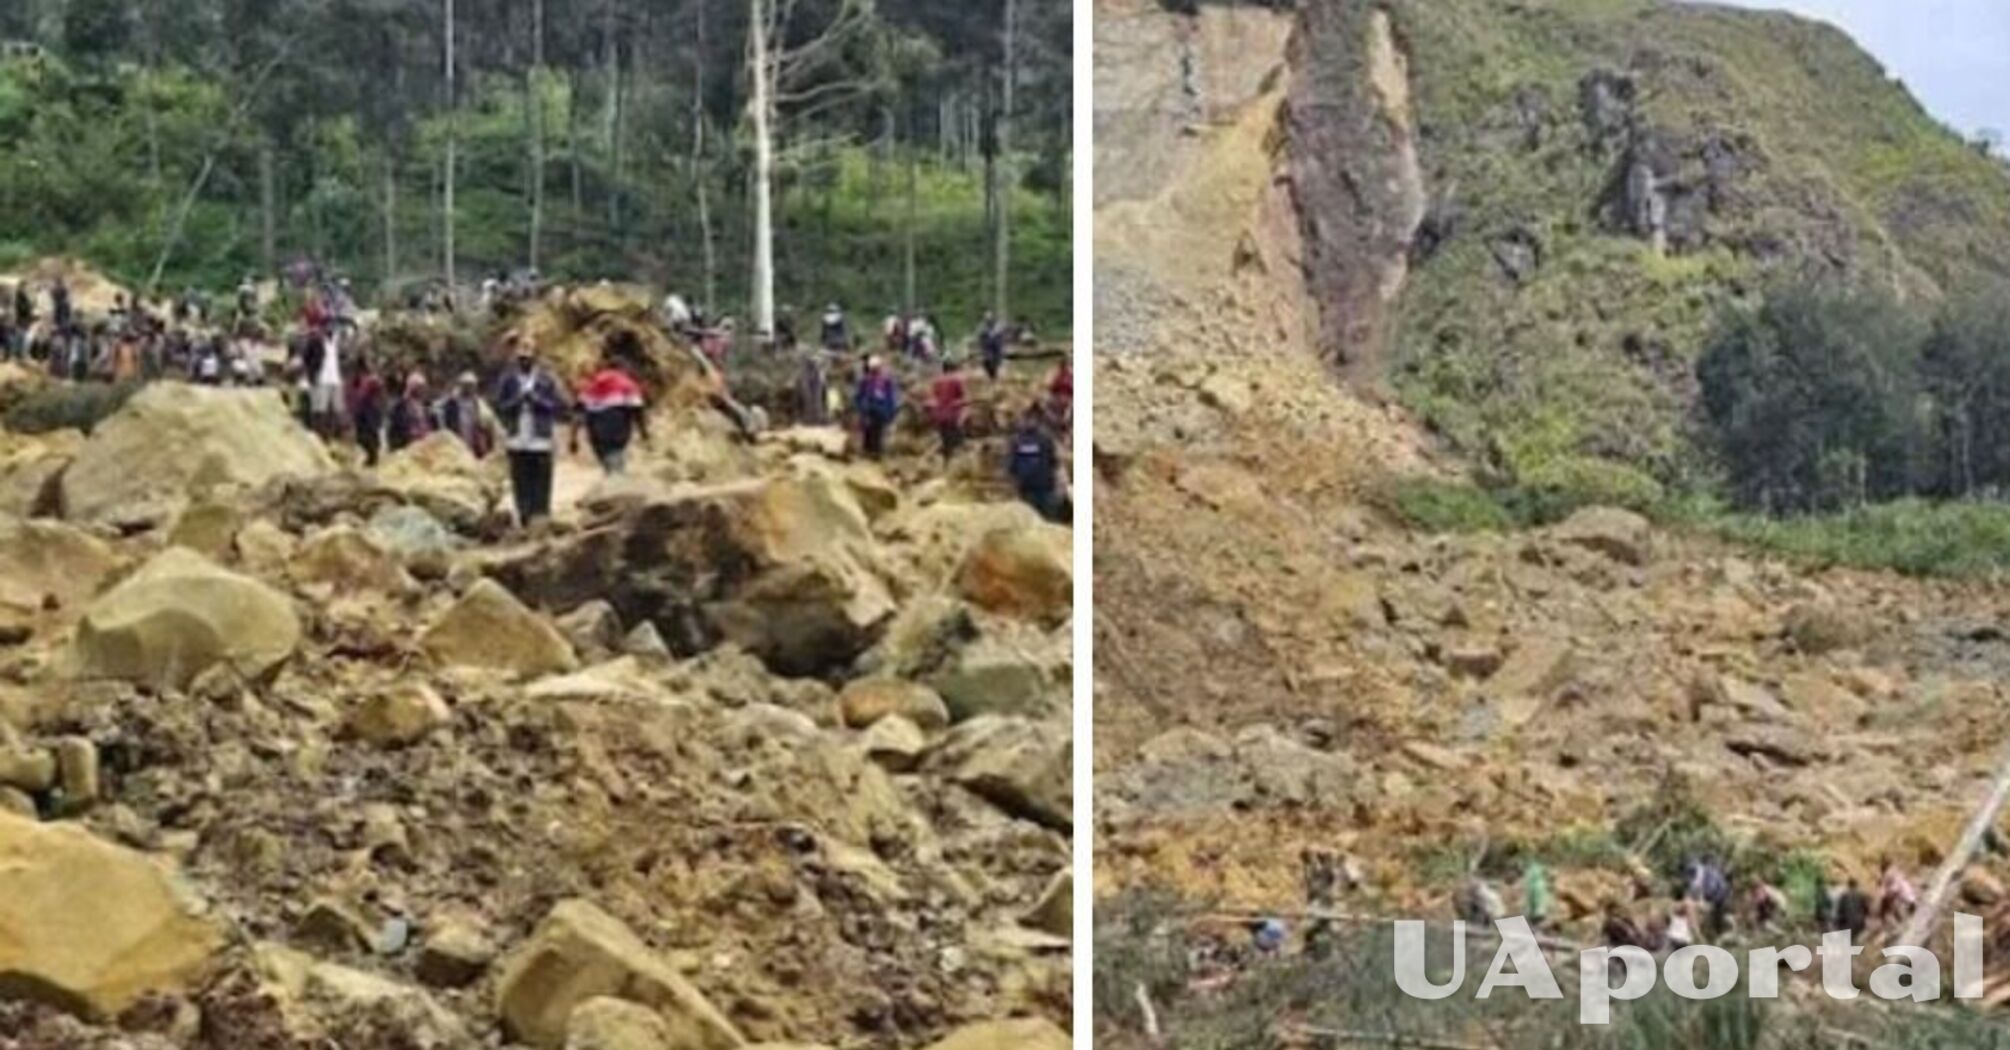 As a result of a landslide in Papua New Guinea, 2,000 people died (photo)